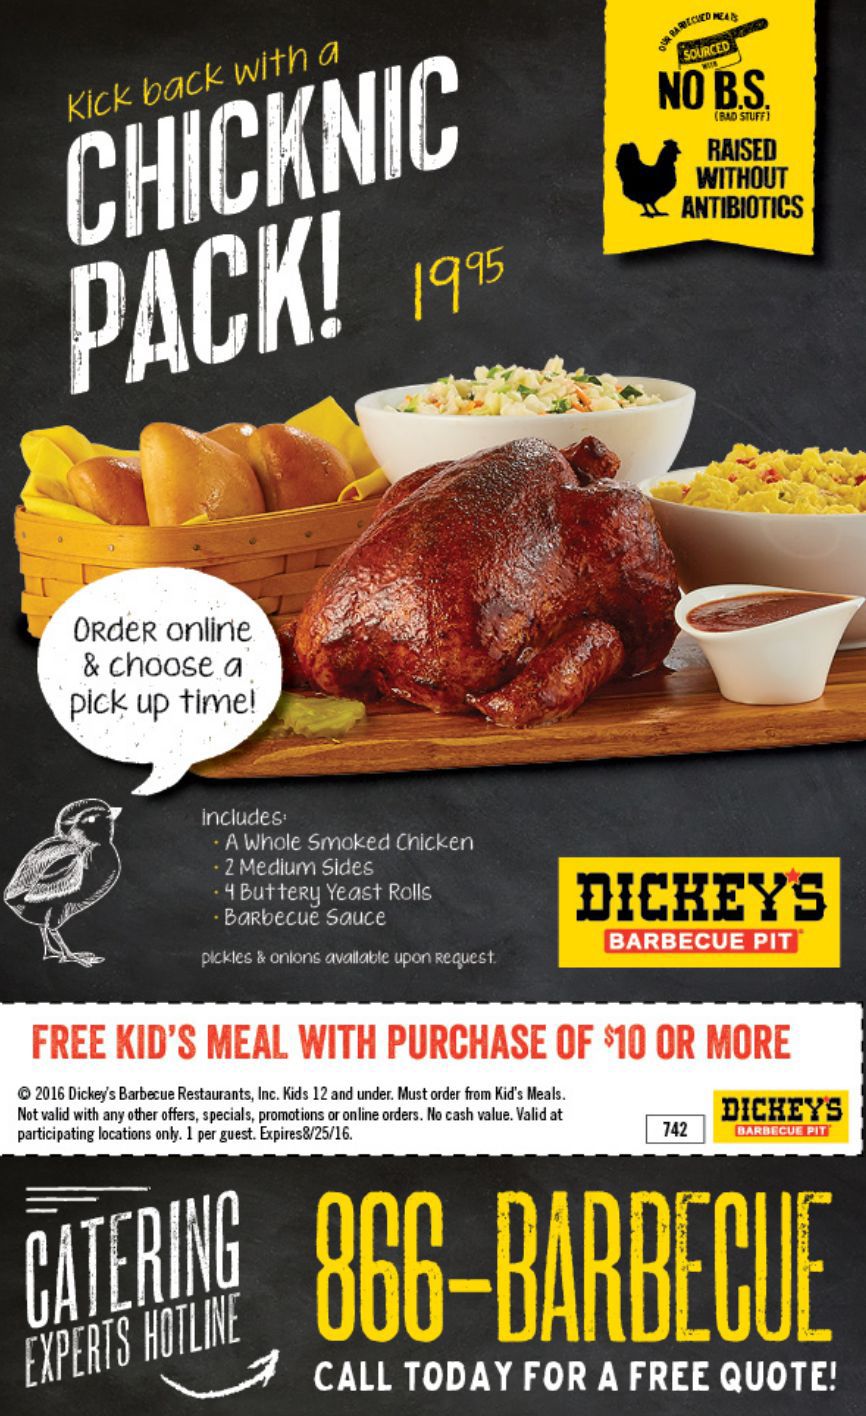 dickey-s-bbq-free-kid-s-meal-coupon-save-a-lot-mom-kdhnews